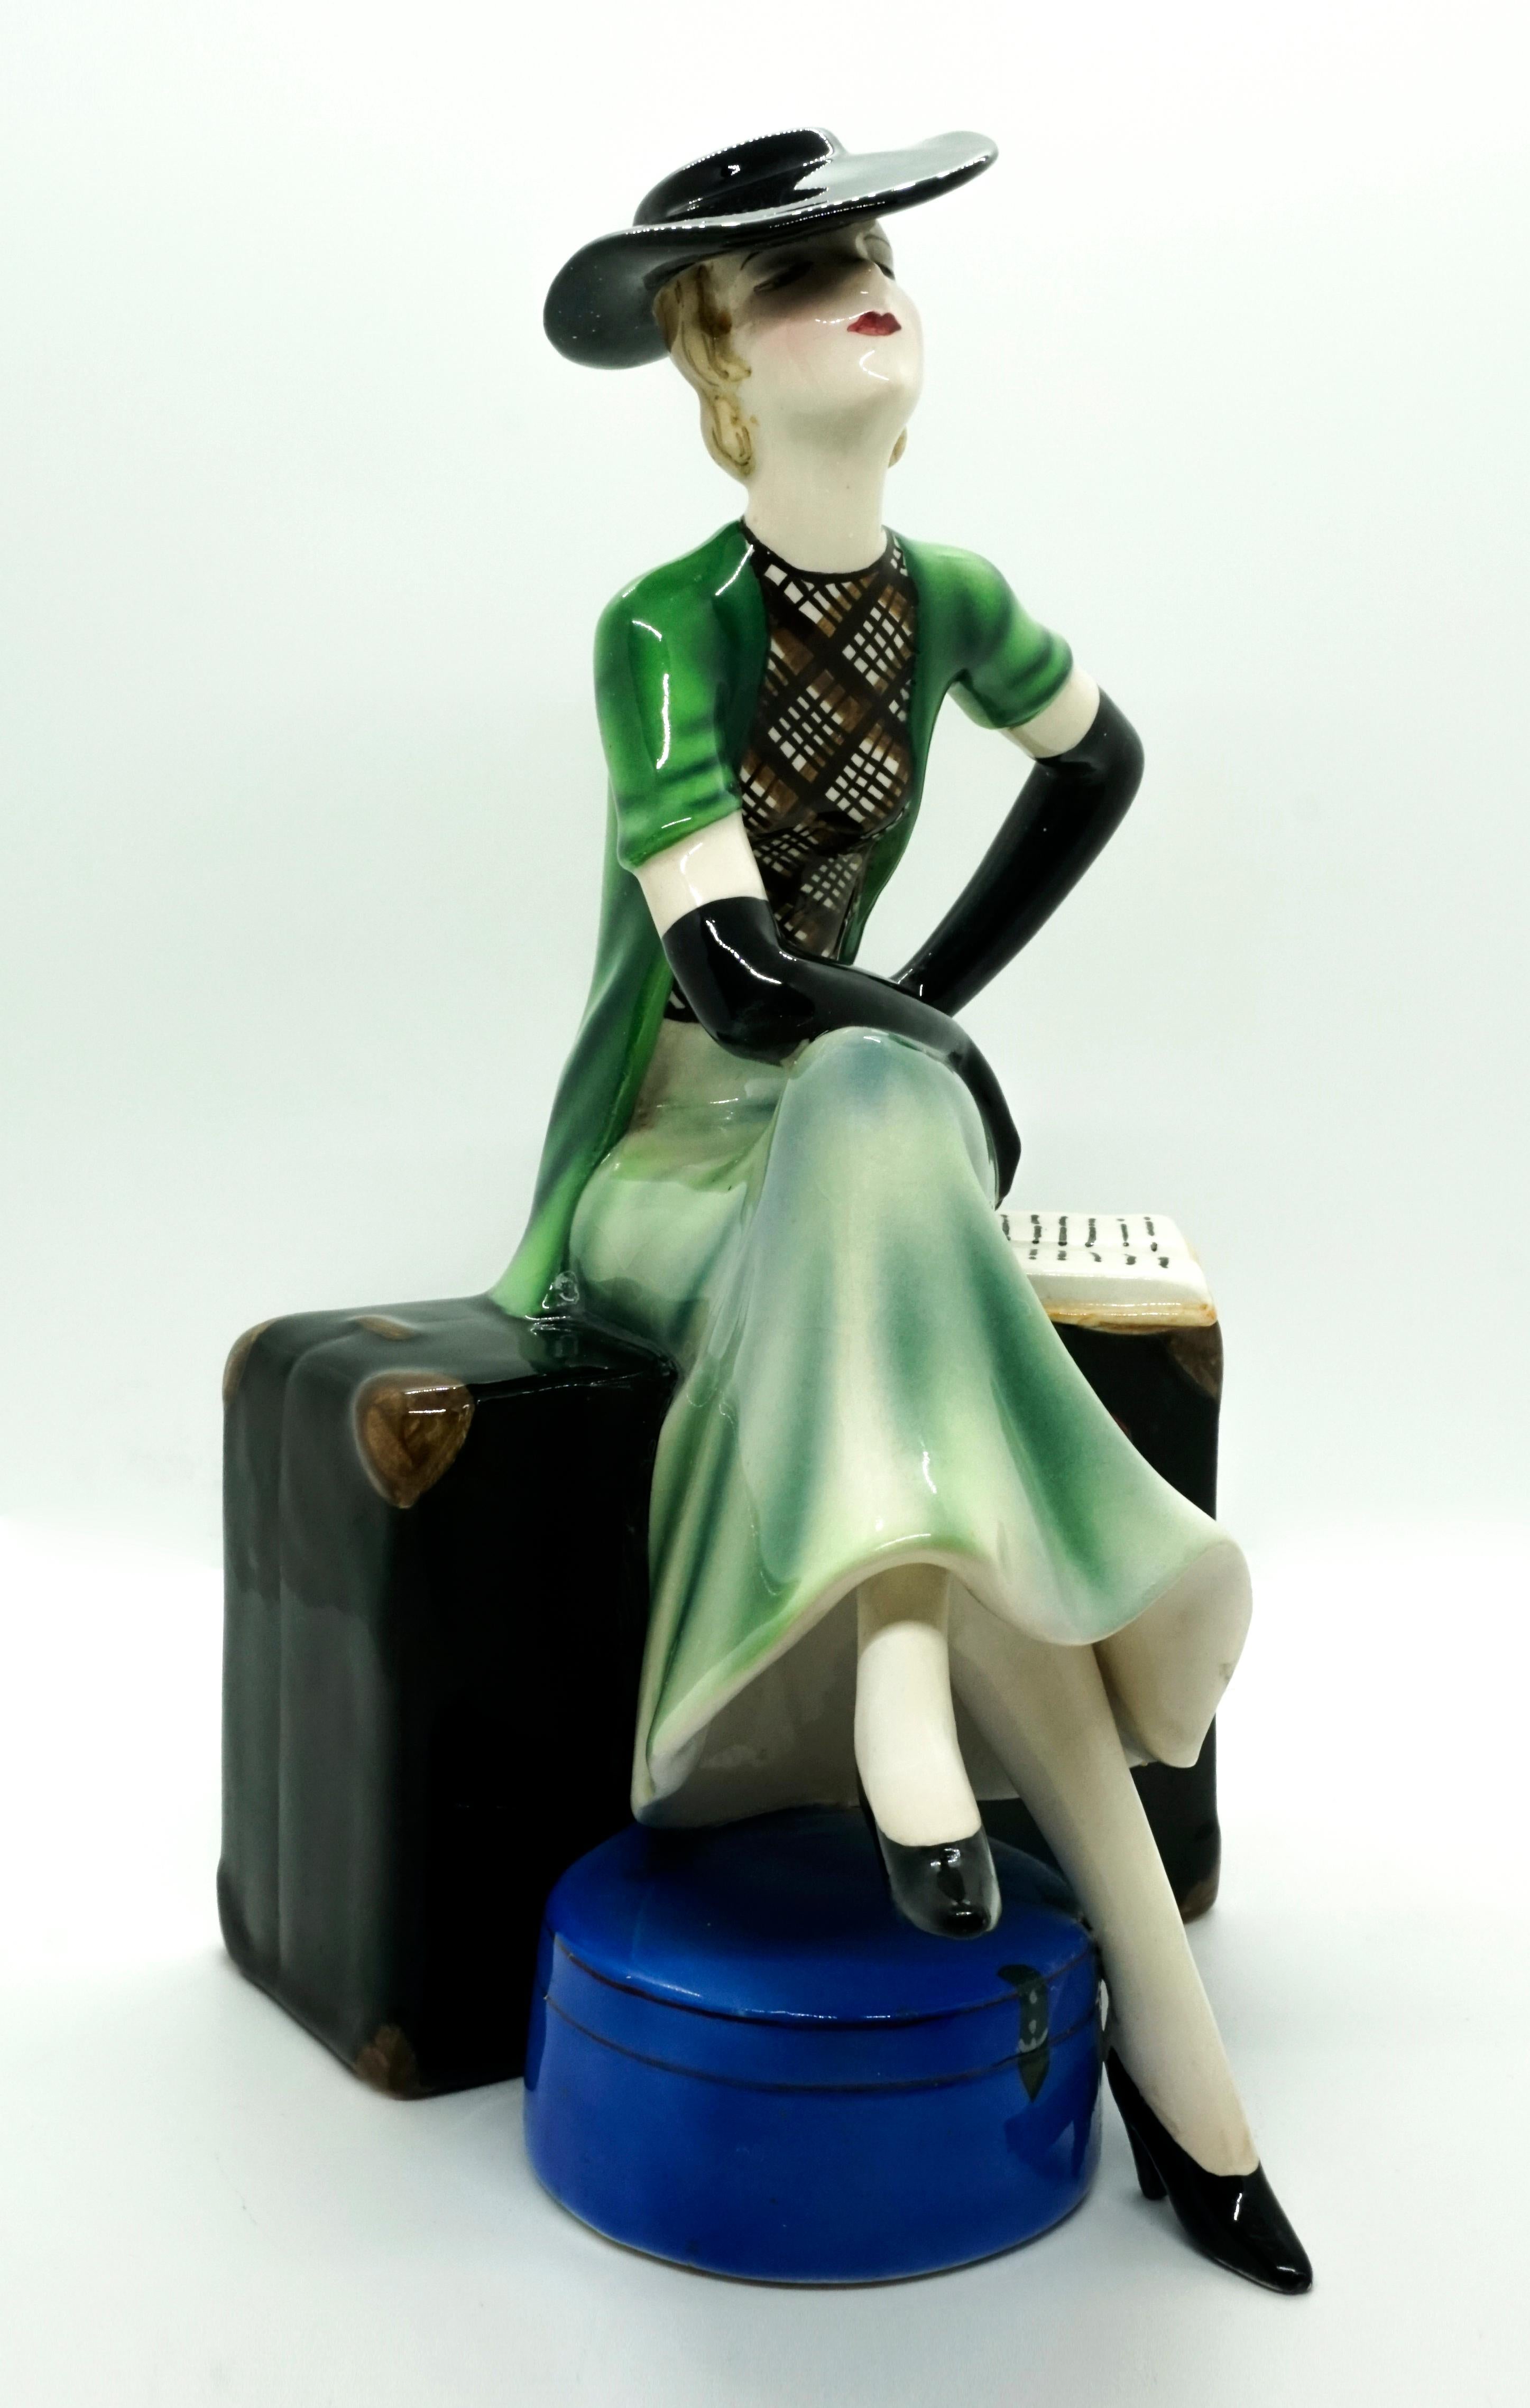 Rare Goldscheider Art Deco ceramic figurine.
A young lady with chin-length blond hair and an elegant black hat, a long green skirt, a checked blouse, over it a short-sleeved green vest and long black gloves is sitting, her legs crossed and her left